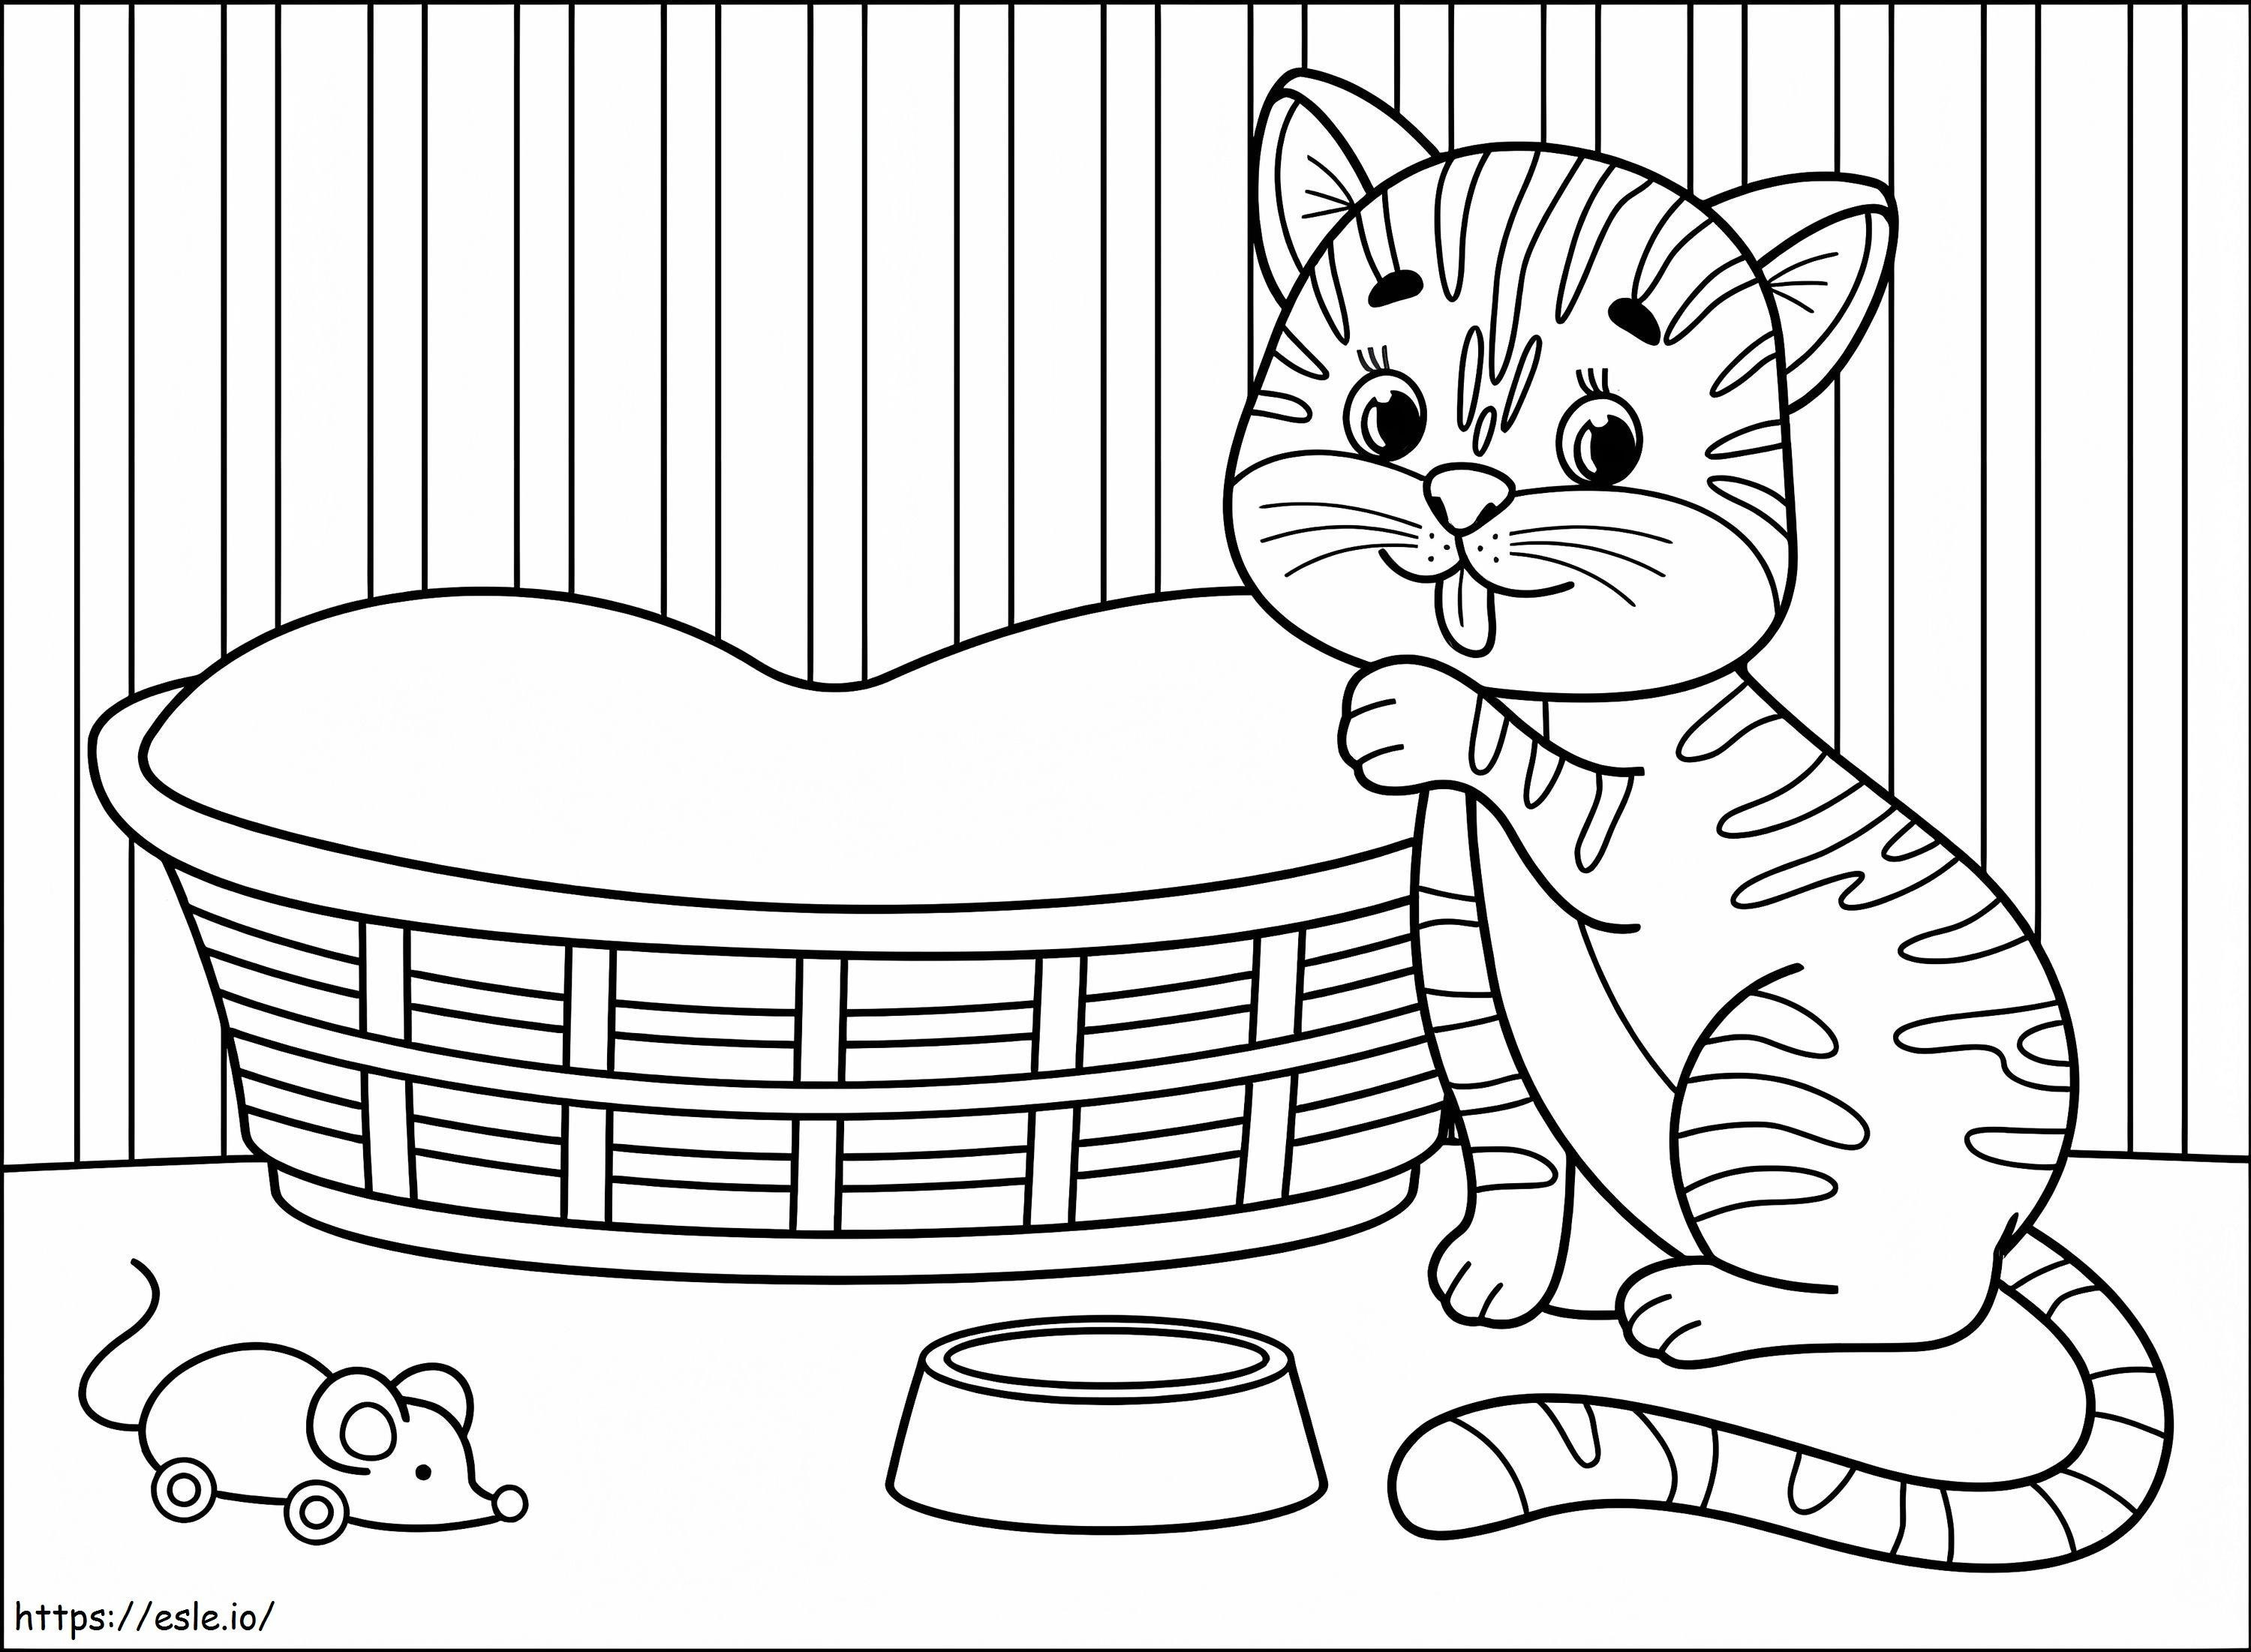 Smiling Cat 1 coloring page